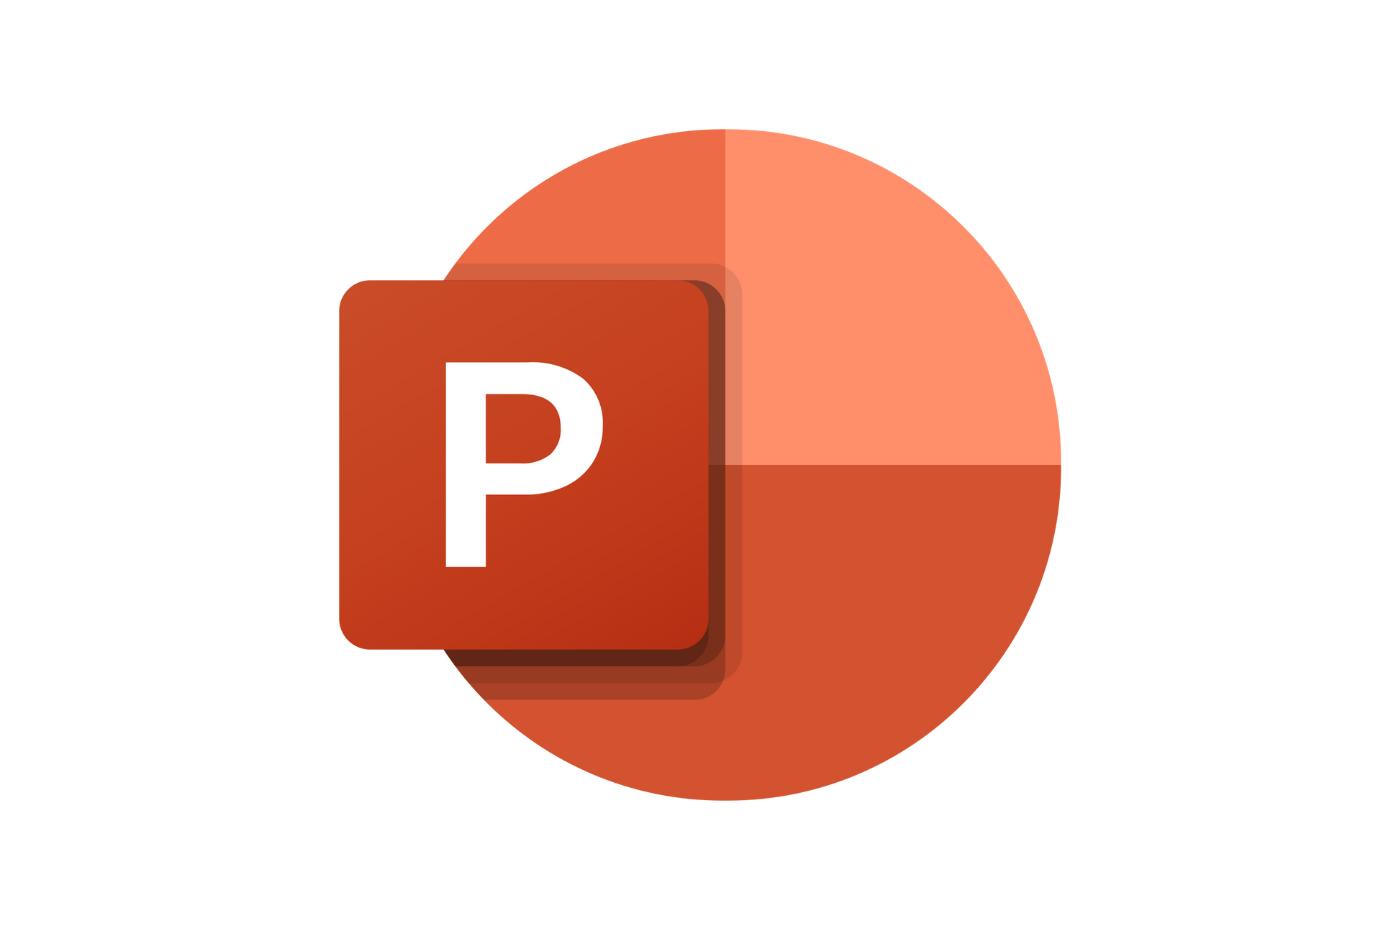 Microsoft Office Powerpoint Course